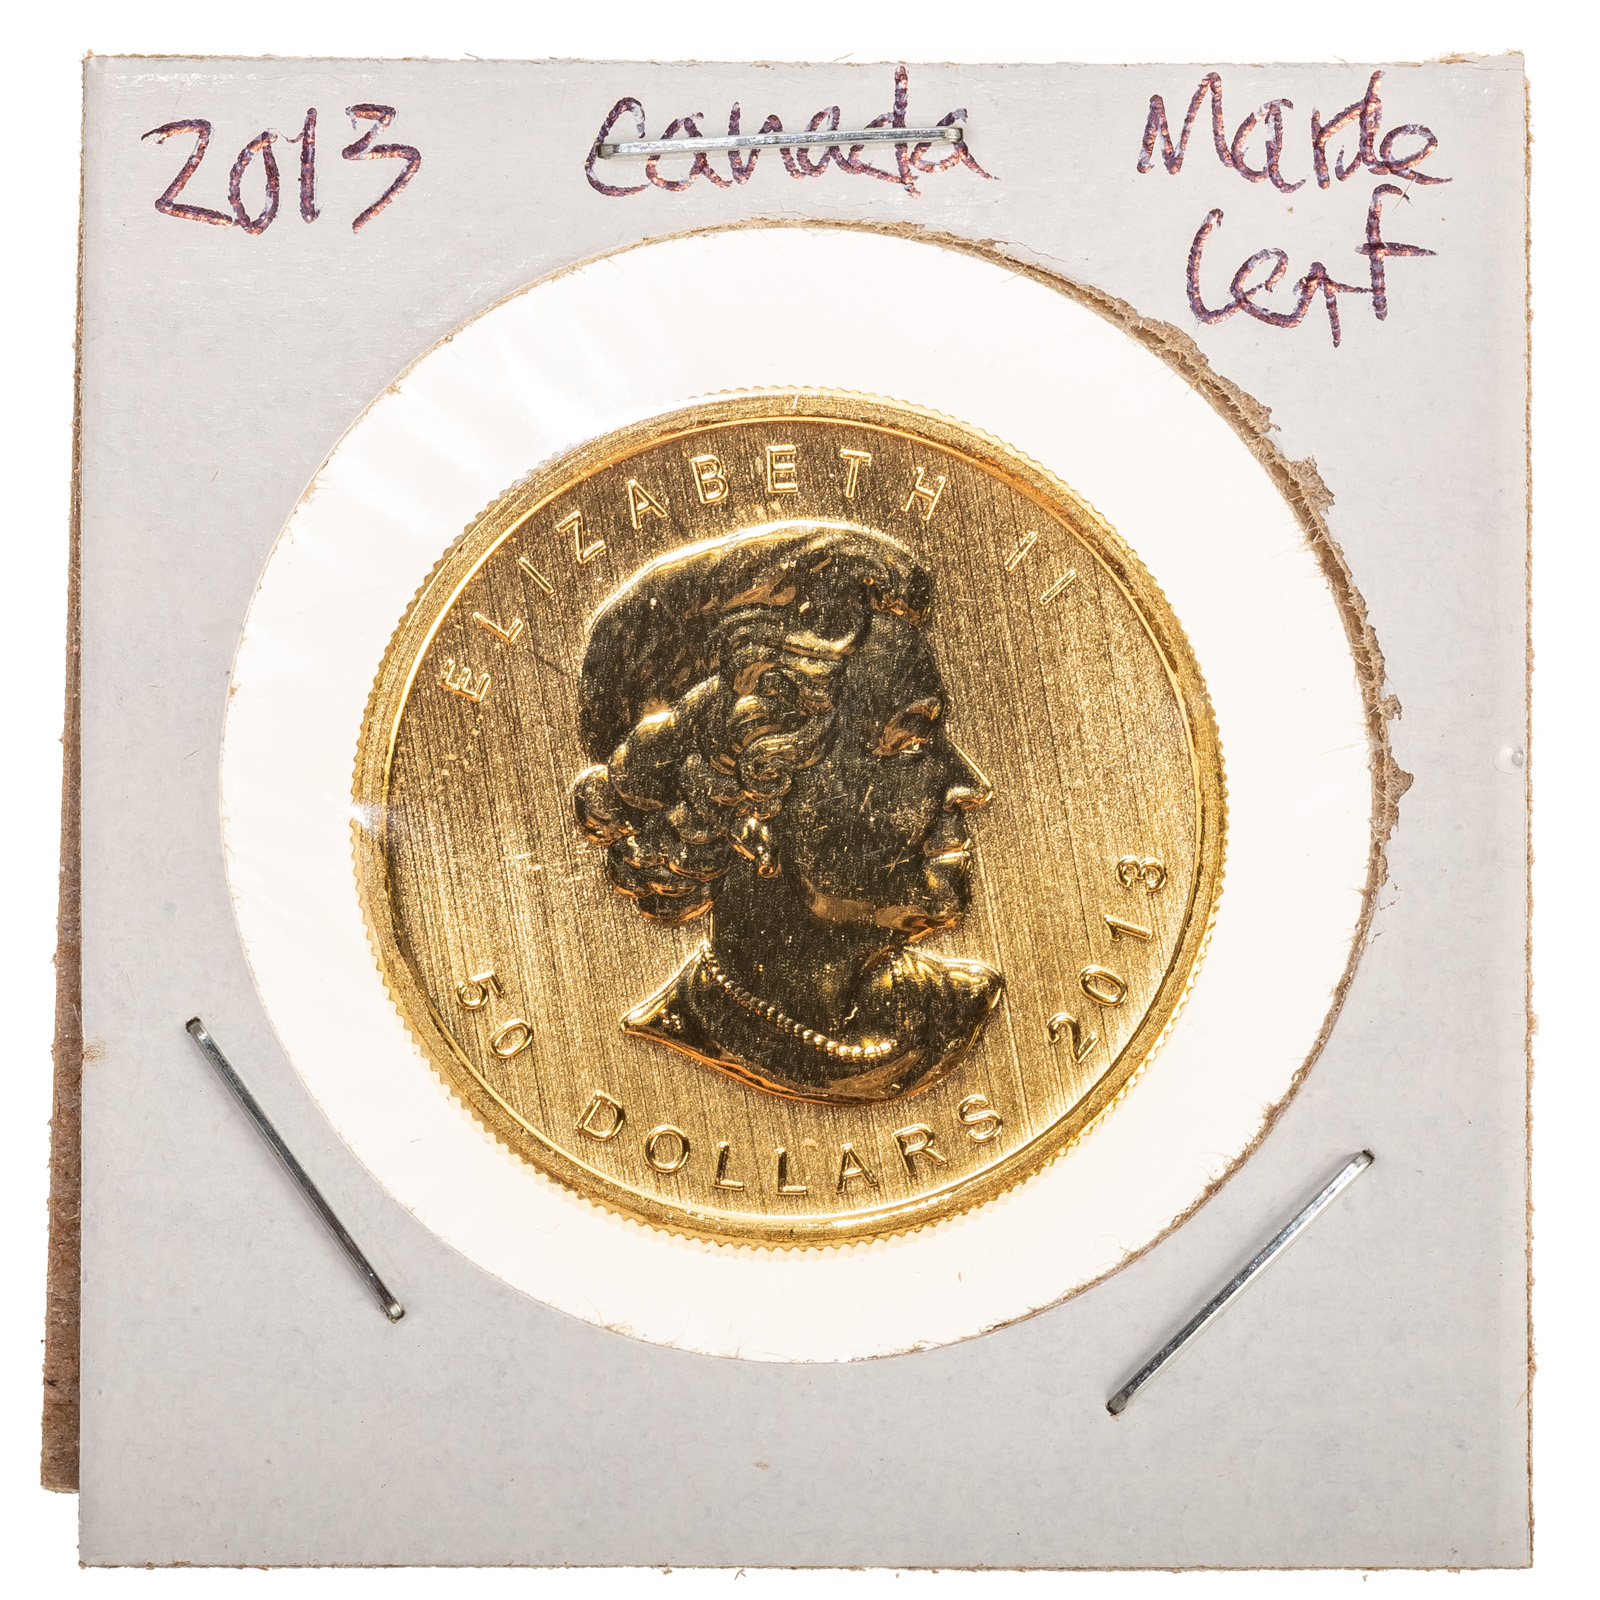 2013 CANADIAN GOLD MAPLE LEAF 1 287a06